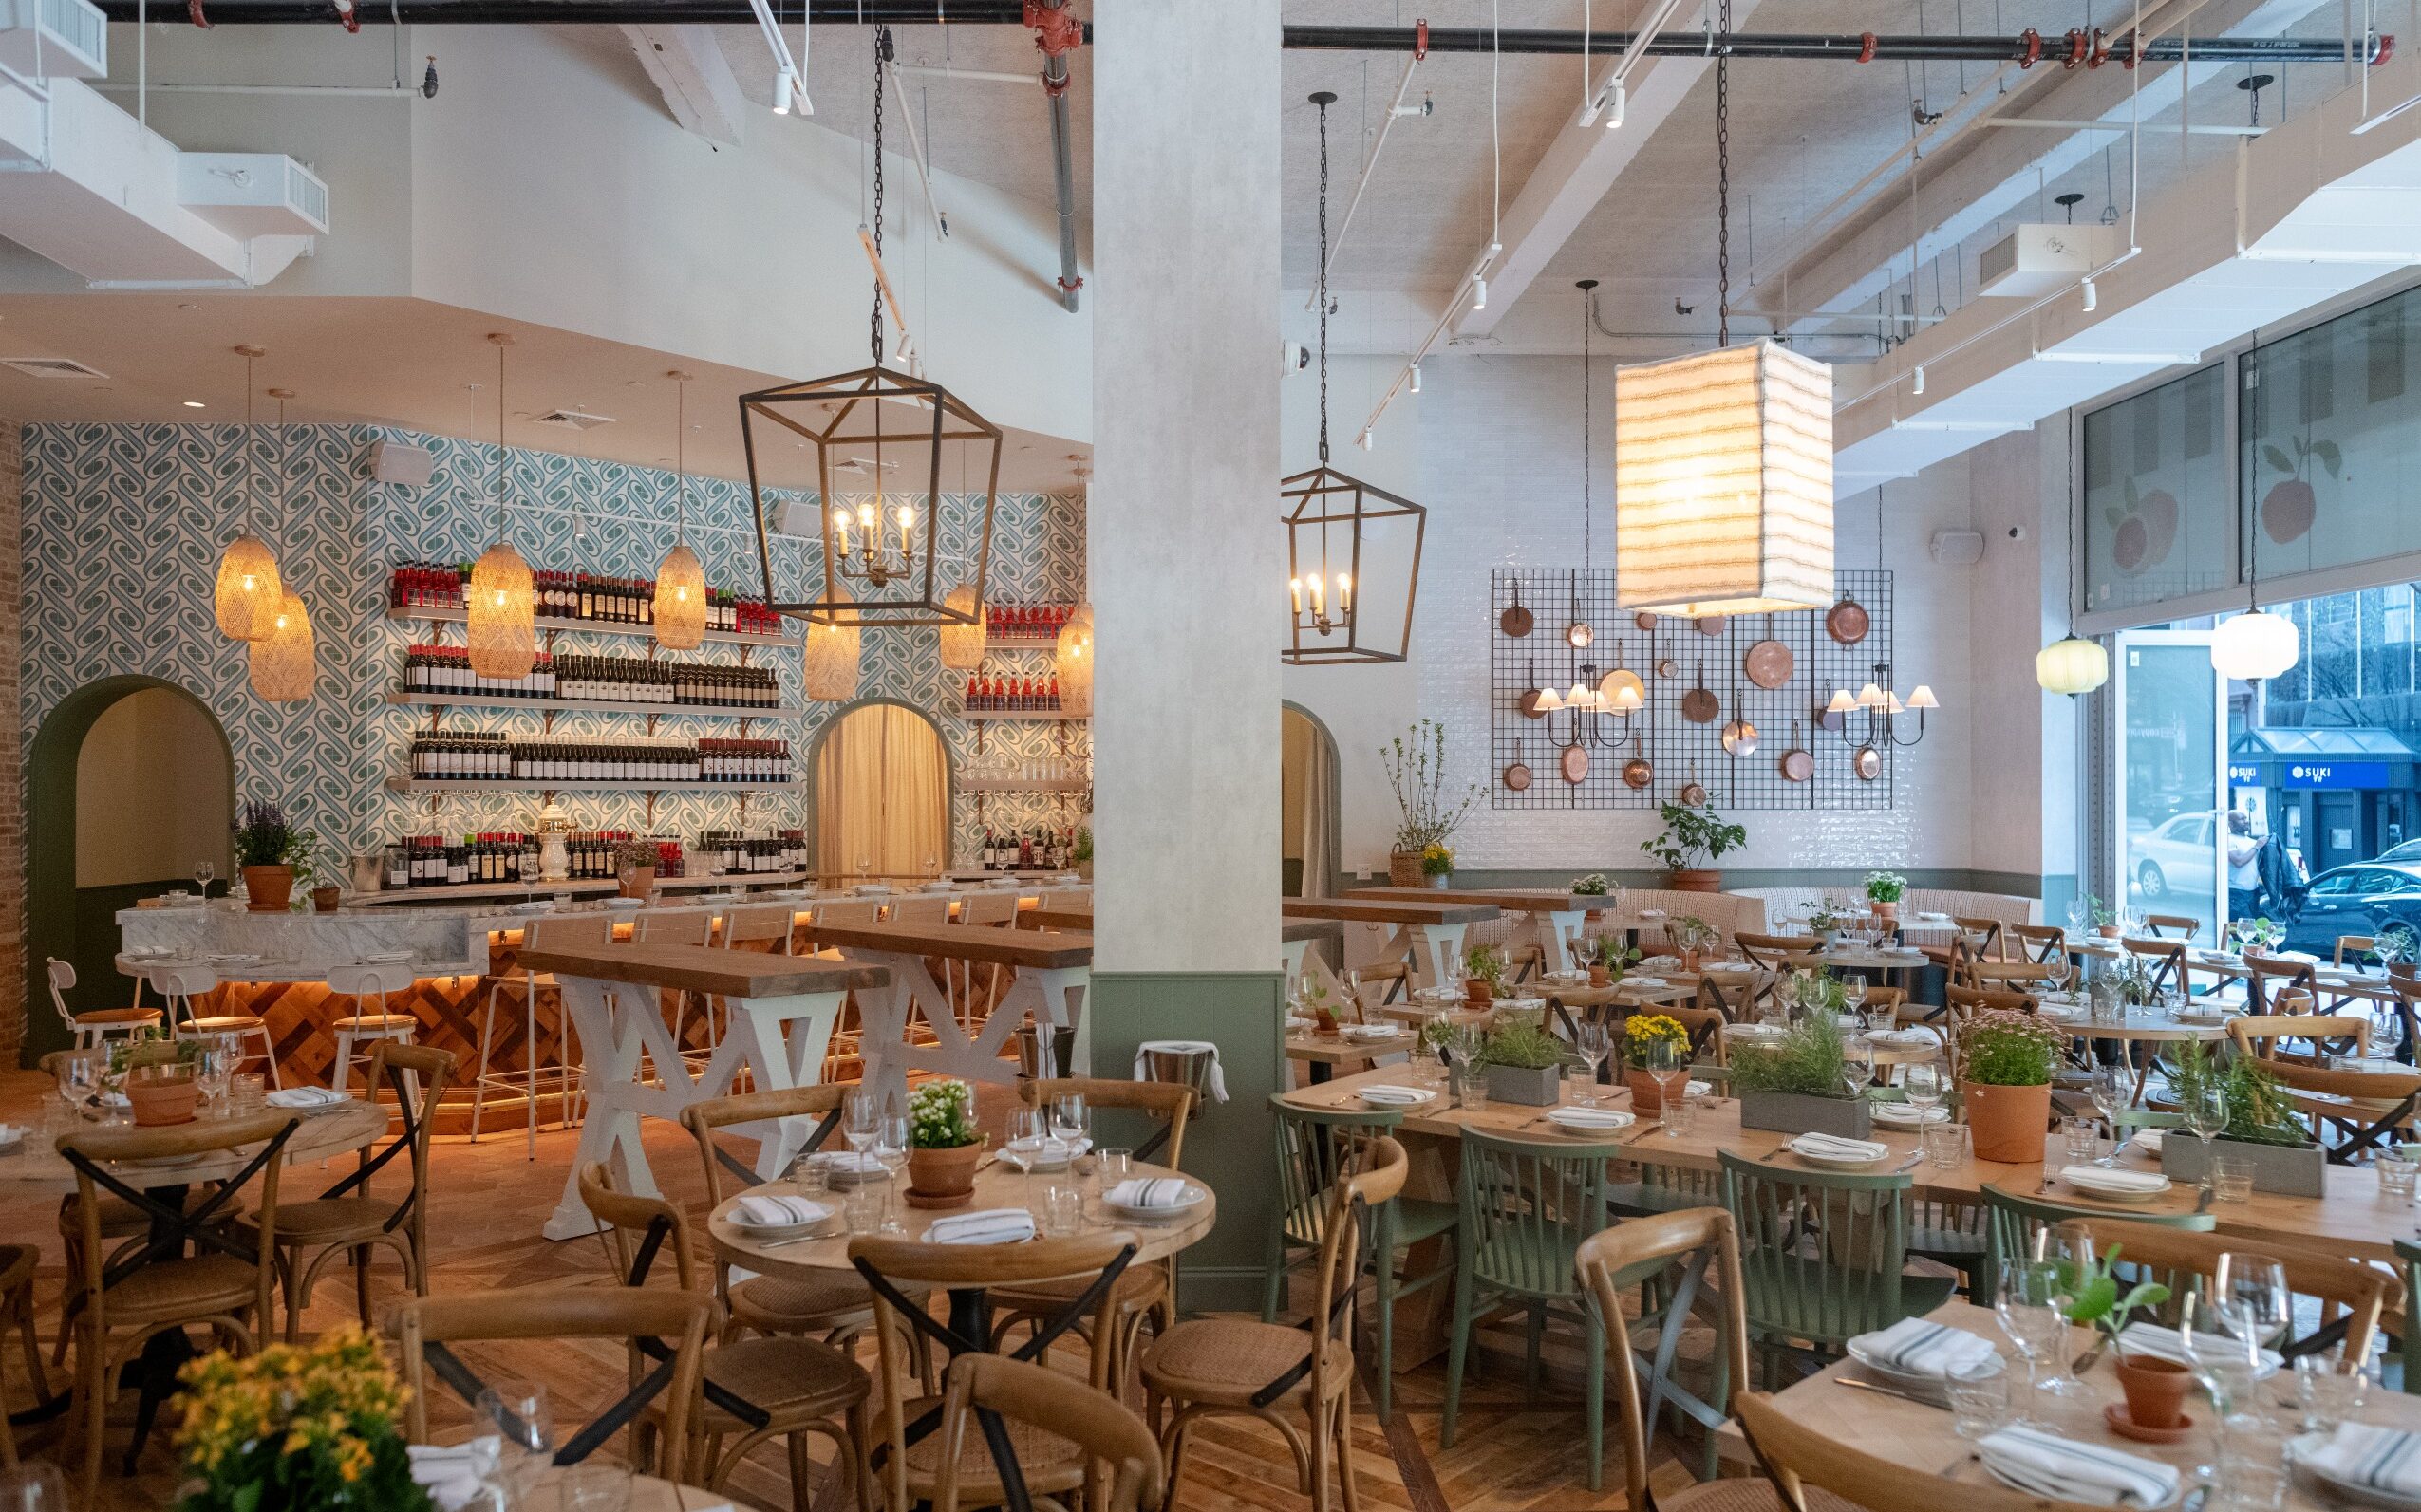 This Popular NYC Italian Restaurant Adds a Laid-Back Flair to Midtown Manhattan